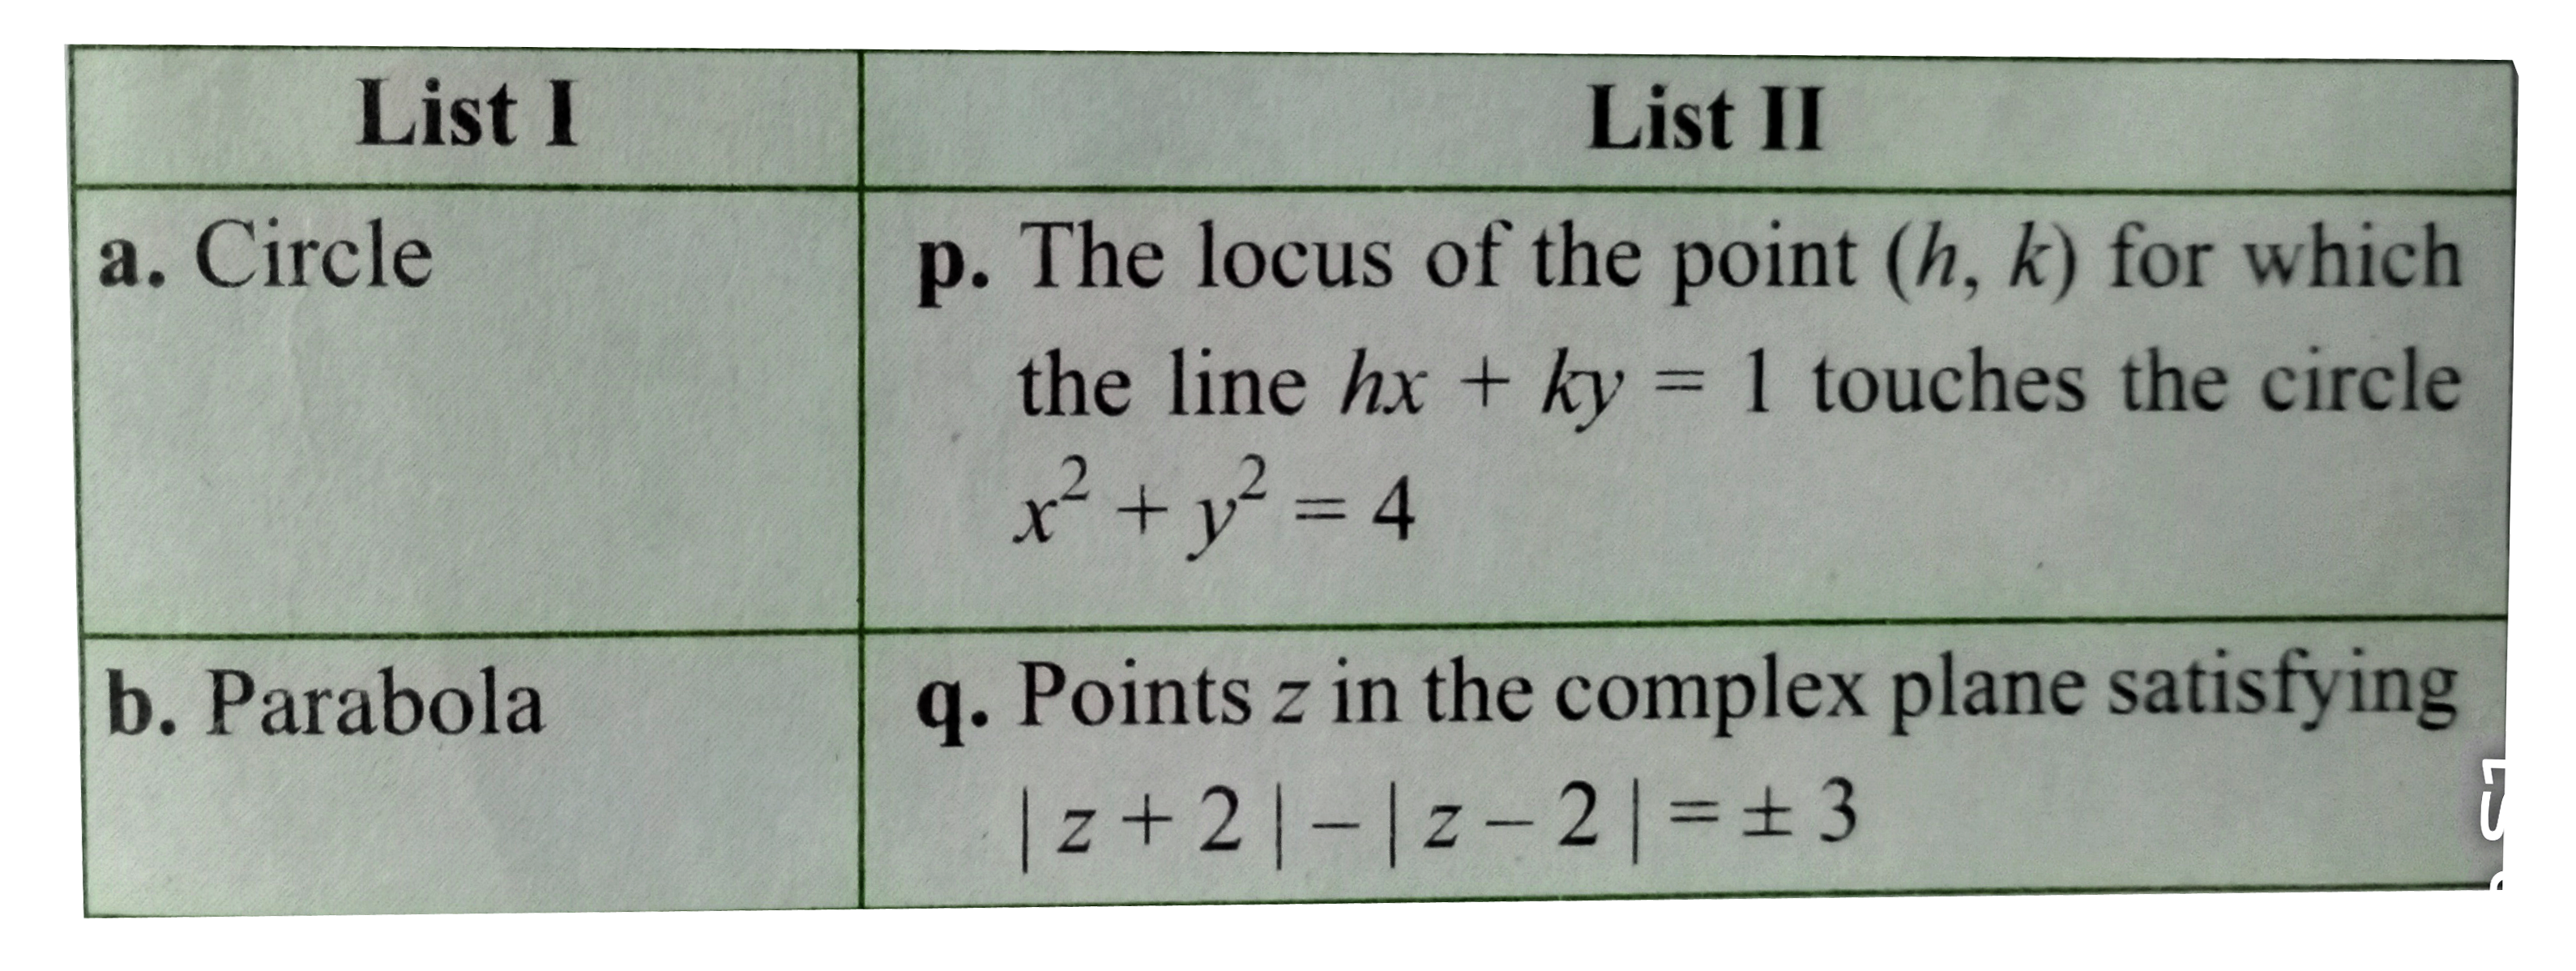 Match the conics in List I with the statements/expressions in List II